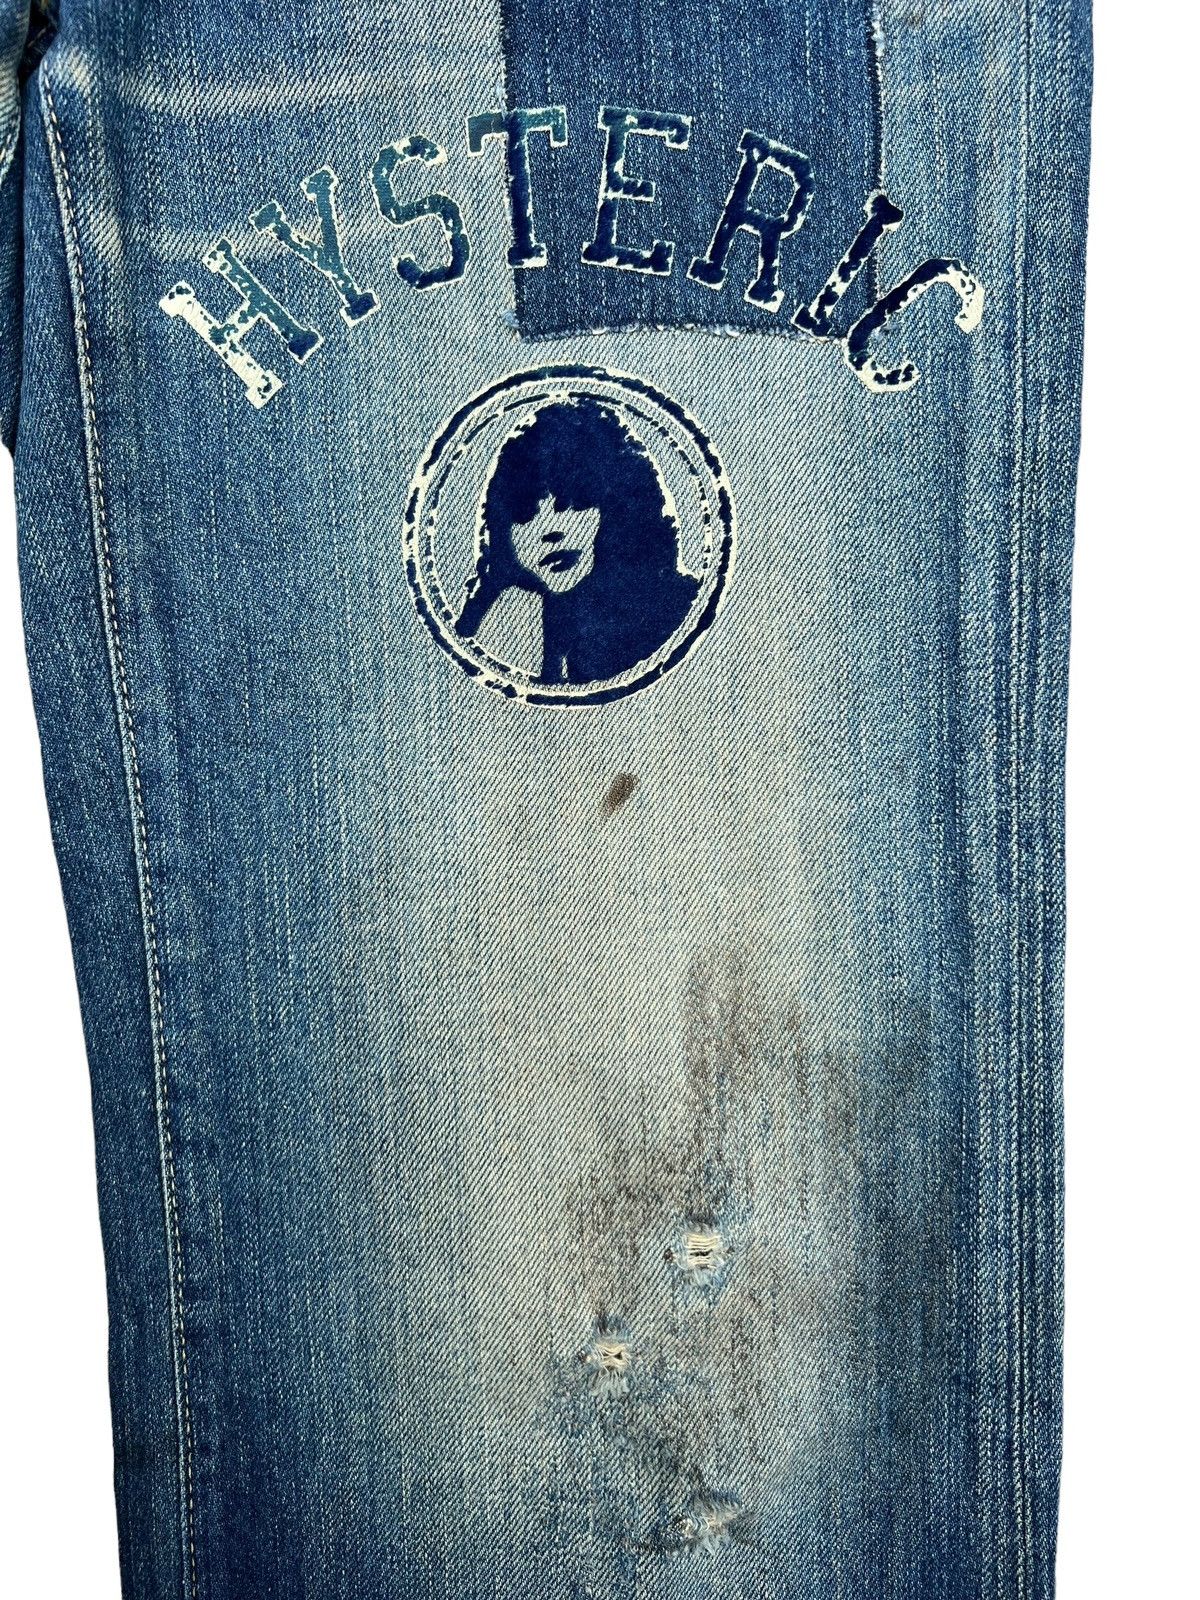 Hysteric Glamour Distressed Lowrise Flare Denim Jeans 29x32 - 5